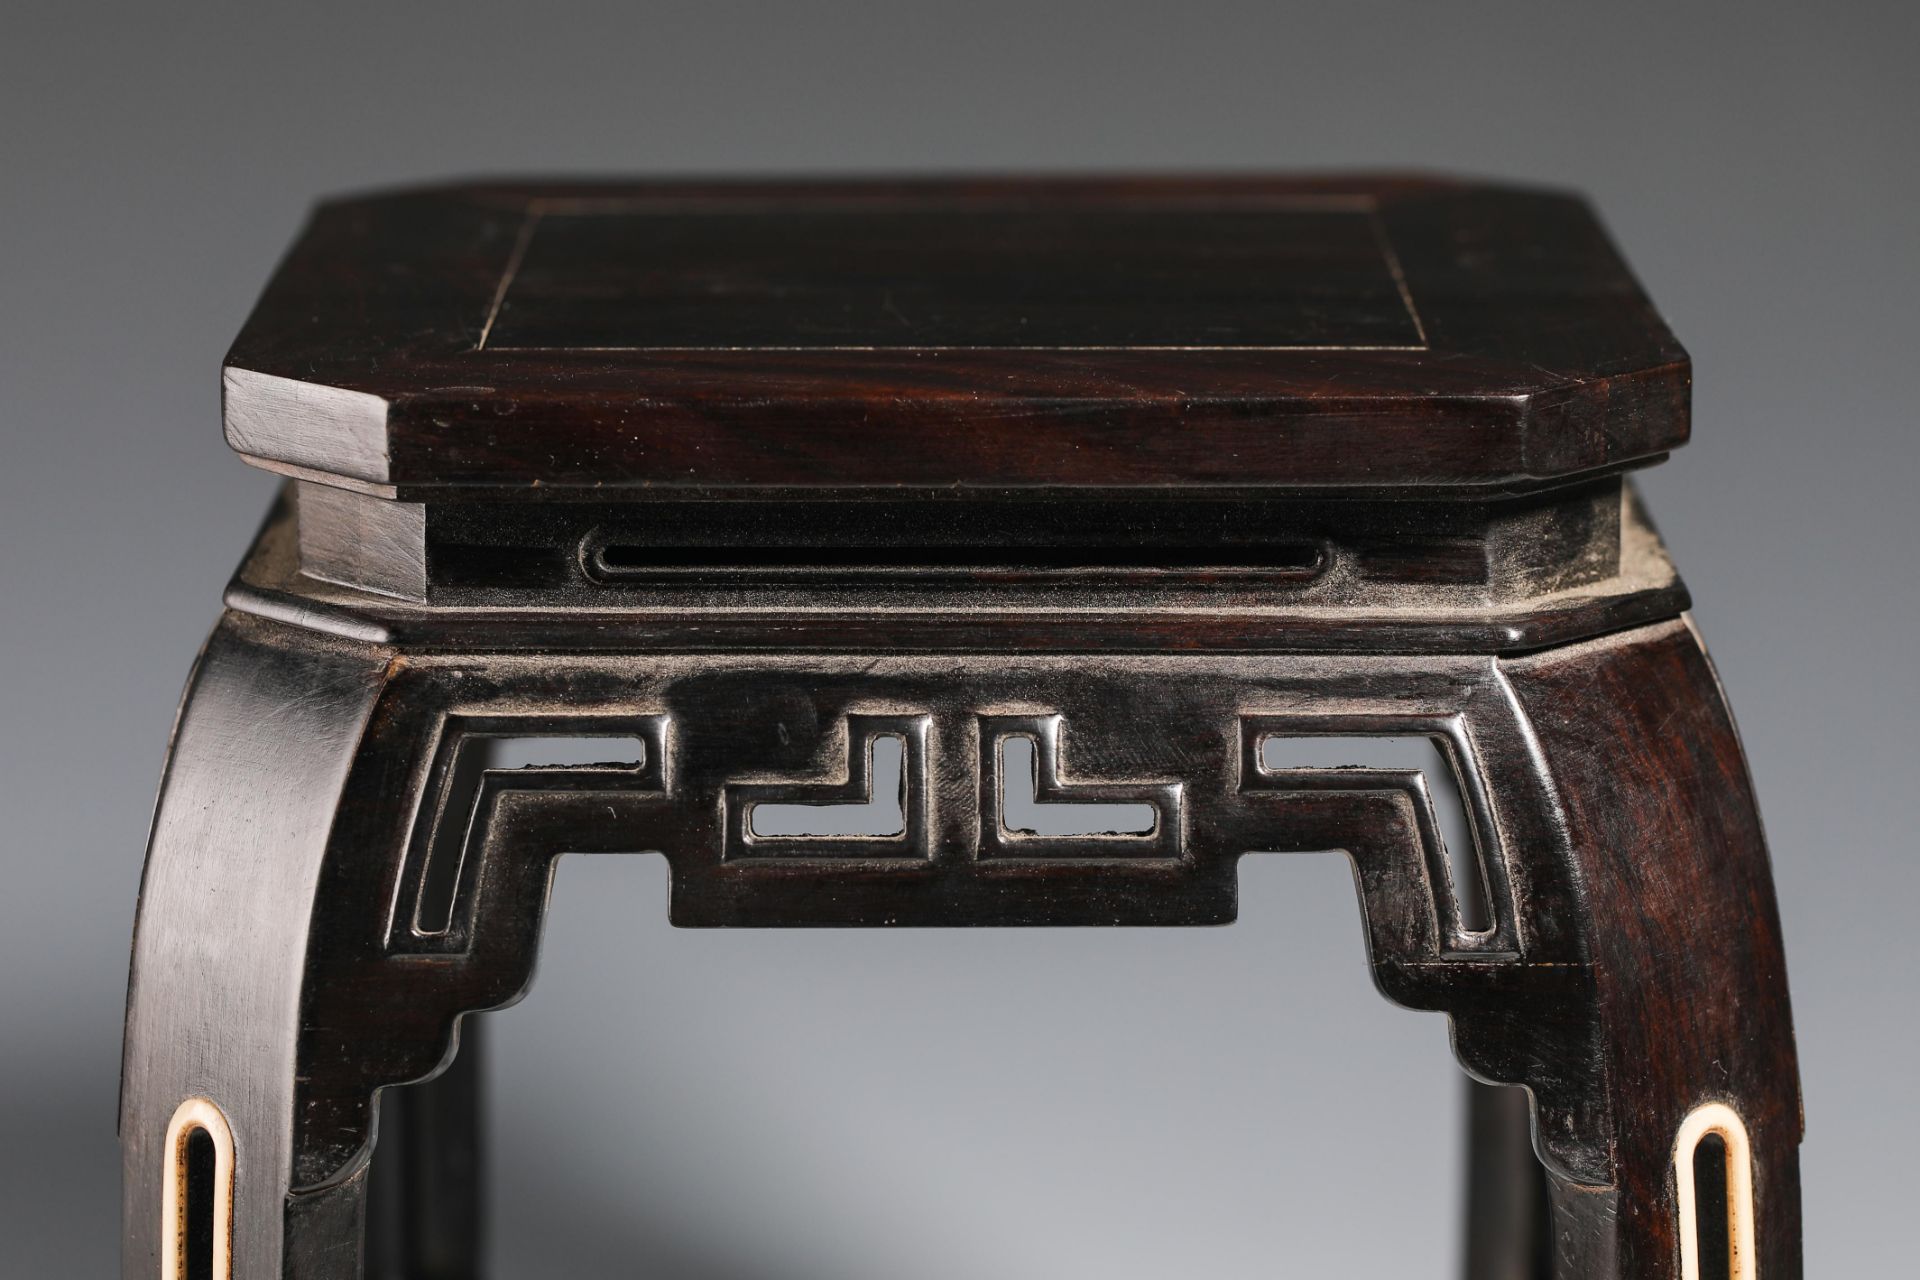 Red wooden bench from Qing Dynasty - Image 2 of 8